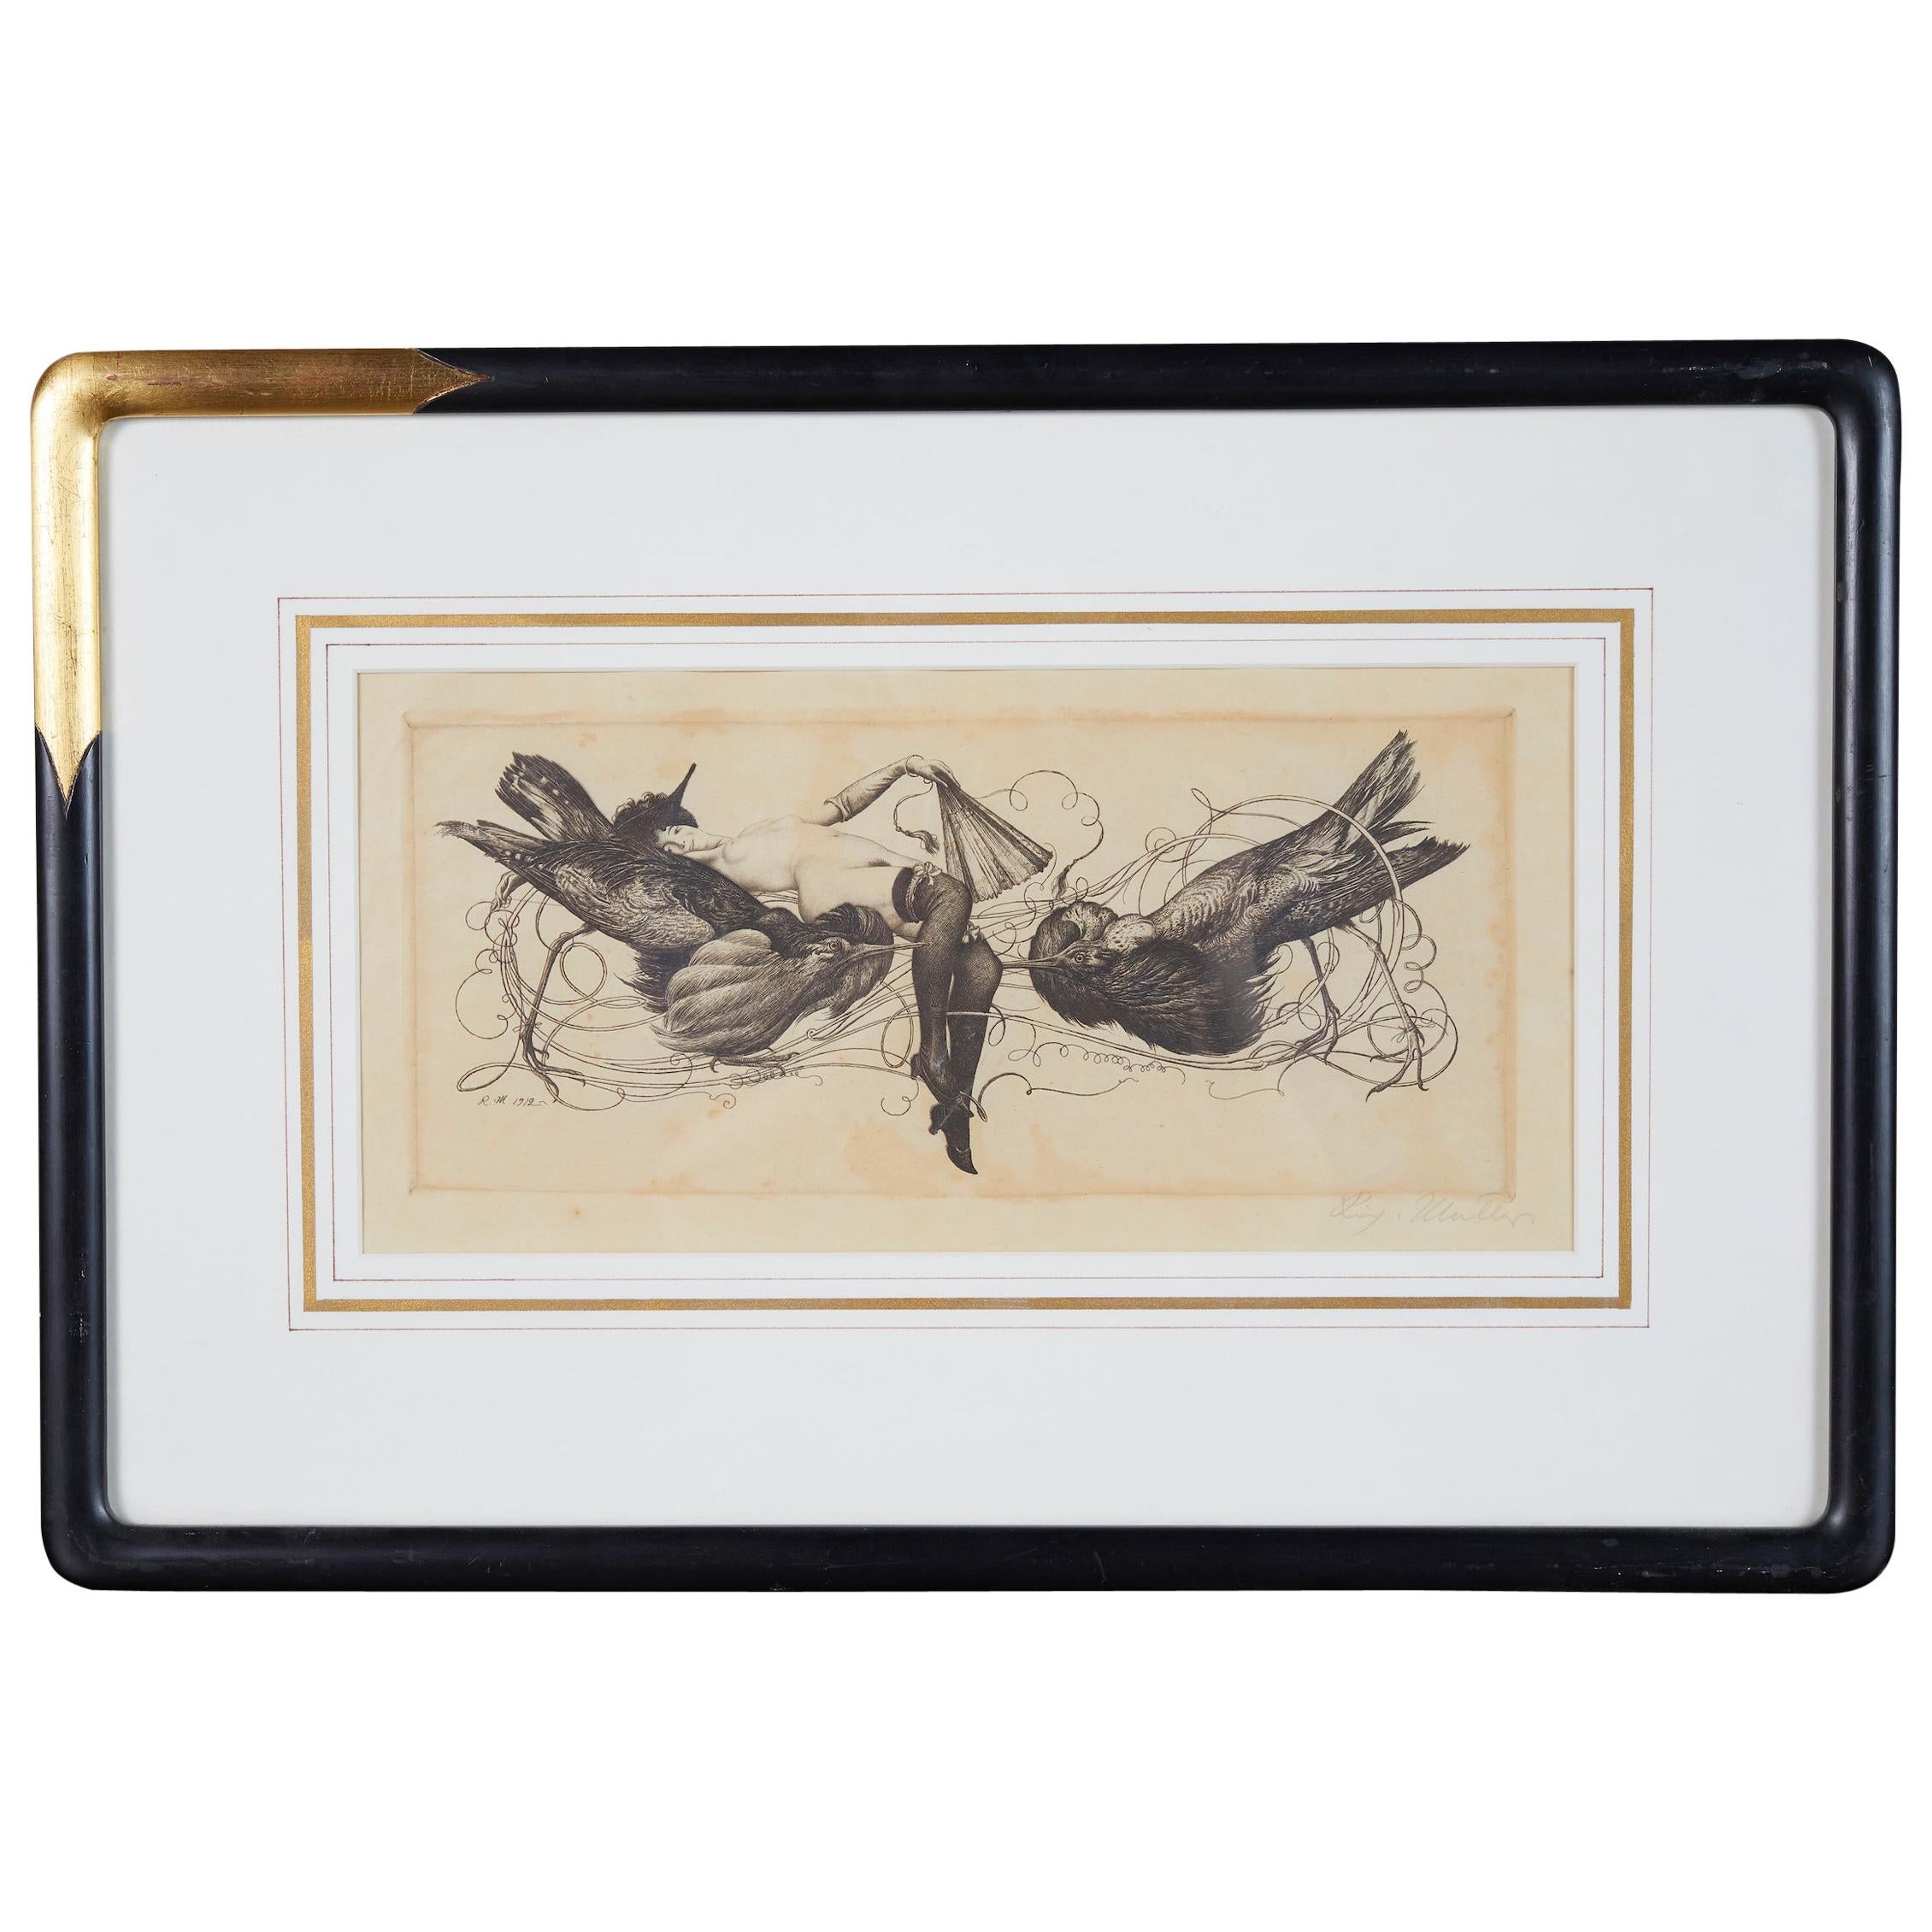 Richard Müller Etching 'Rivals' in the Style of F�élicien Rops